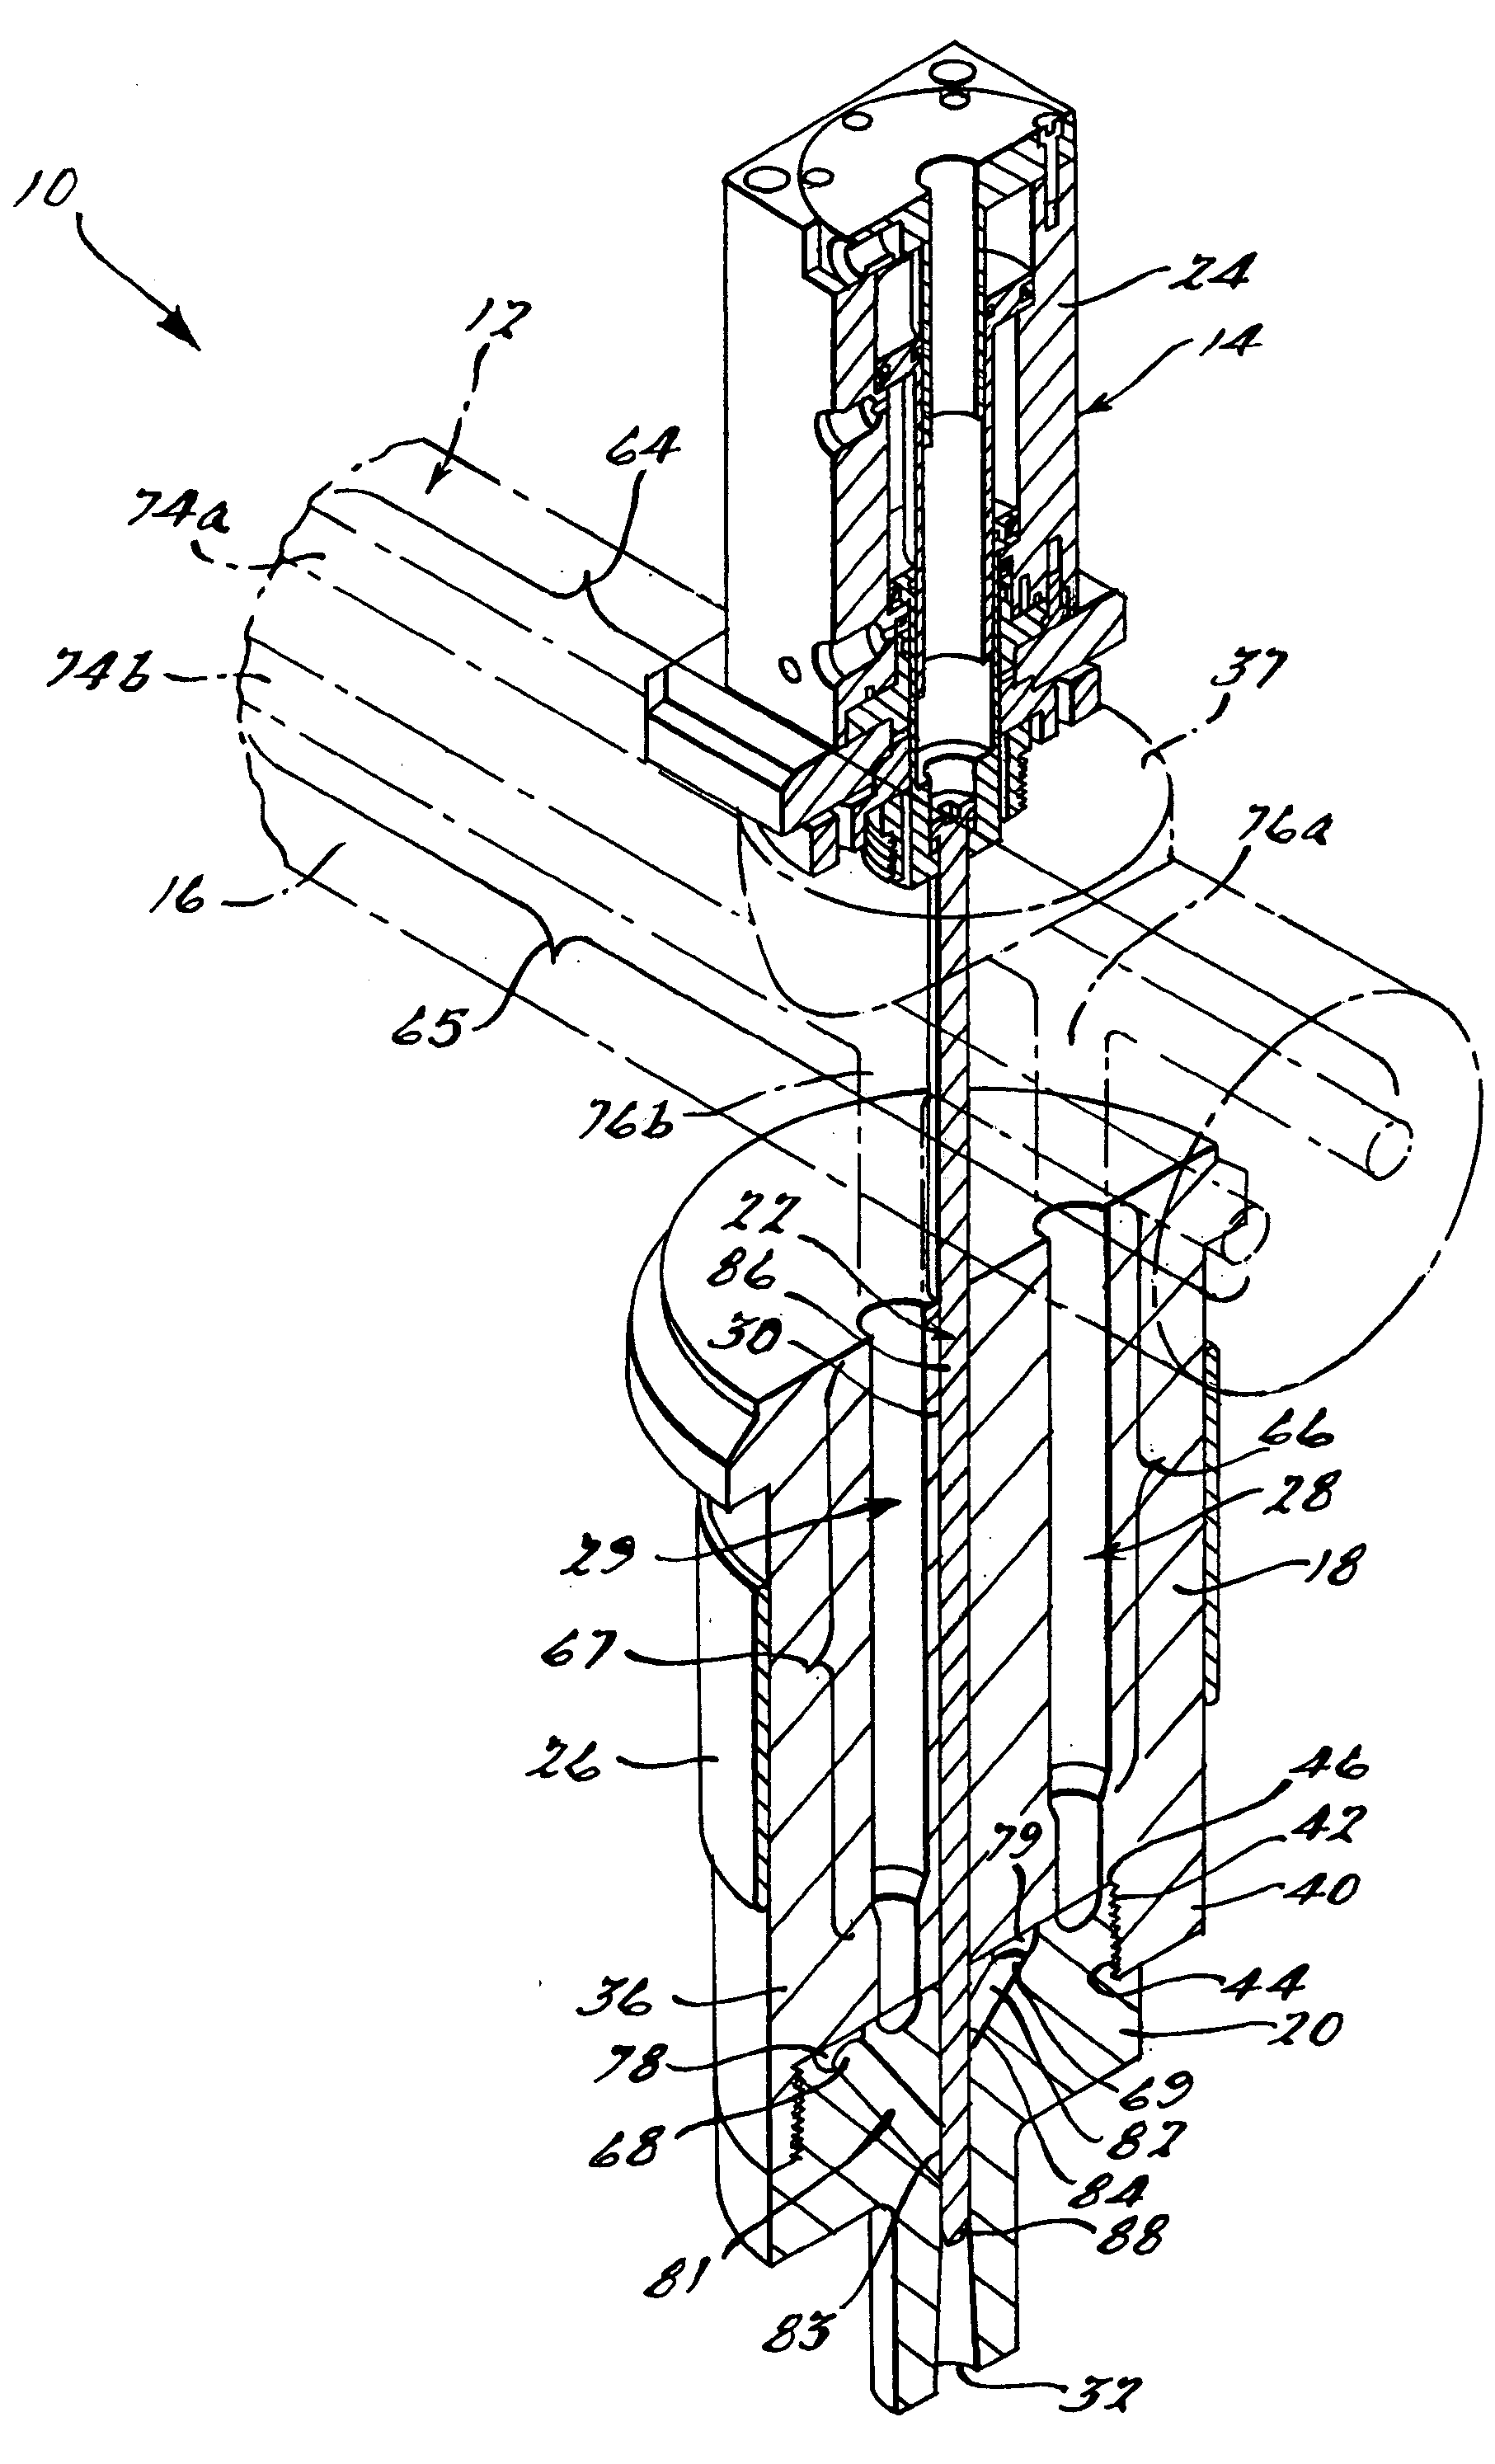 Injection molding system for injection molding a plurality of materials